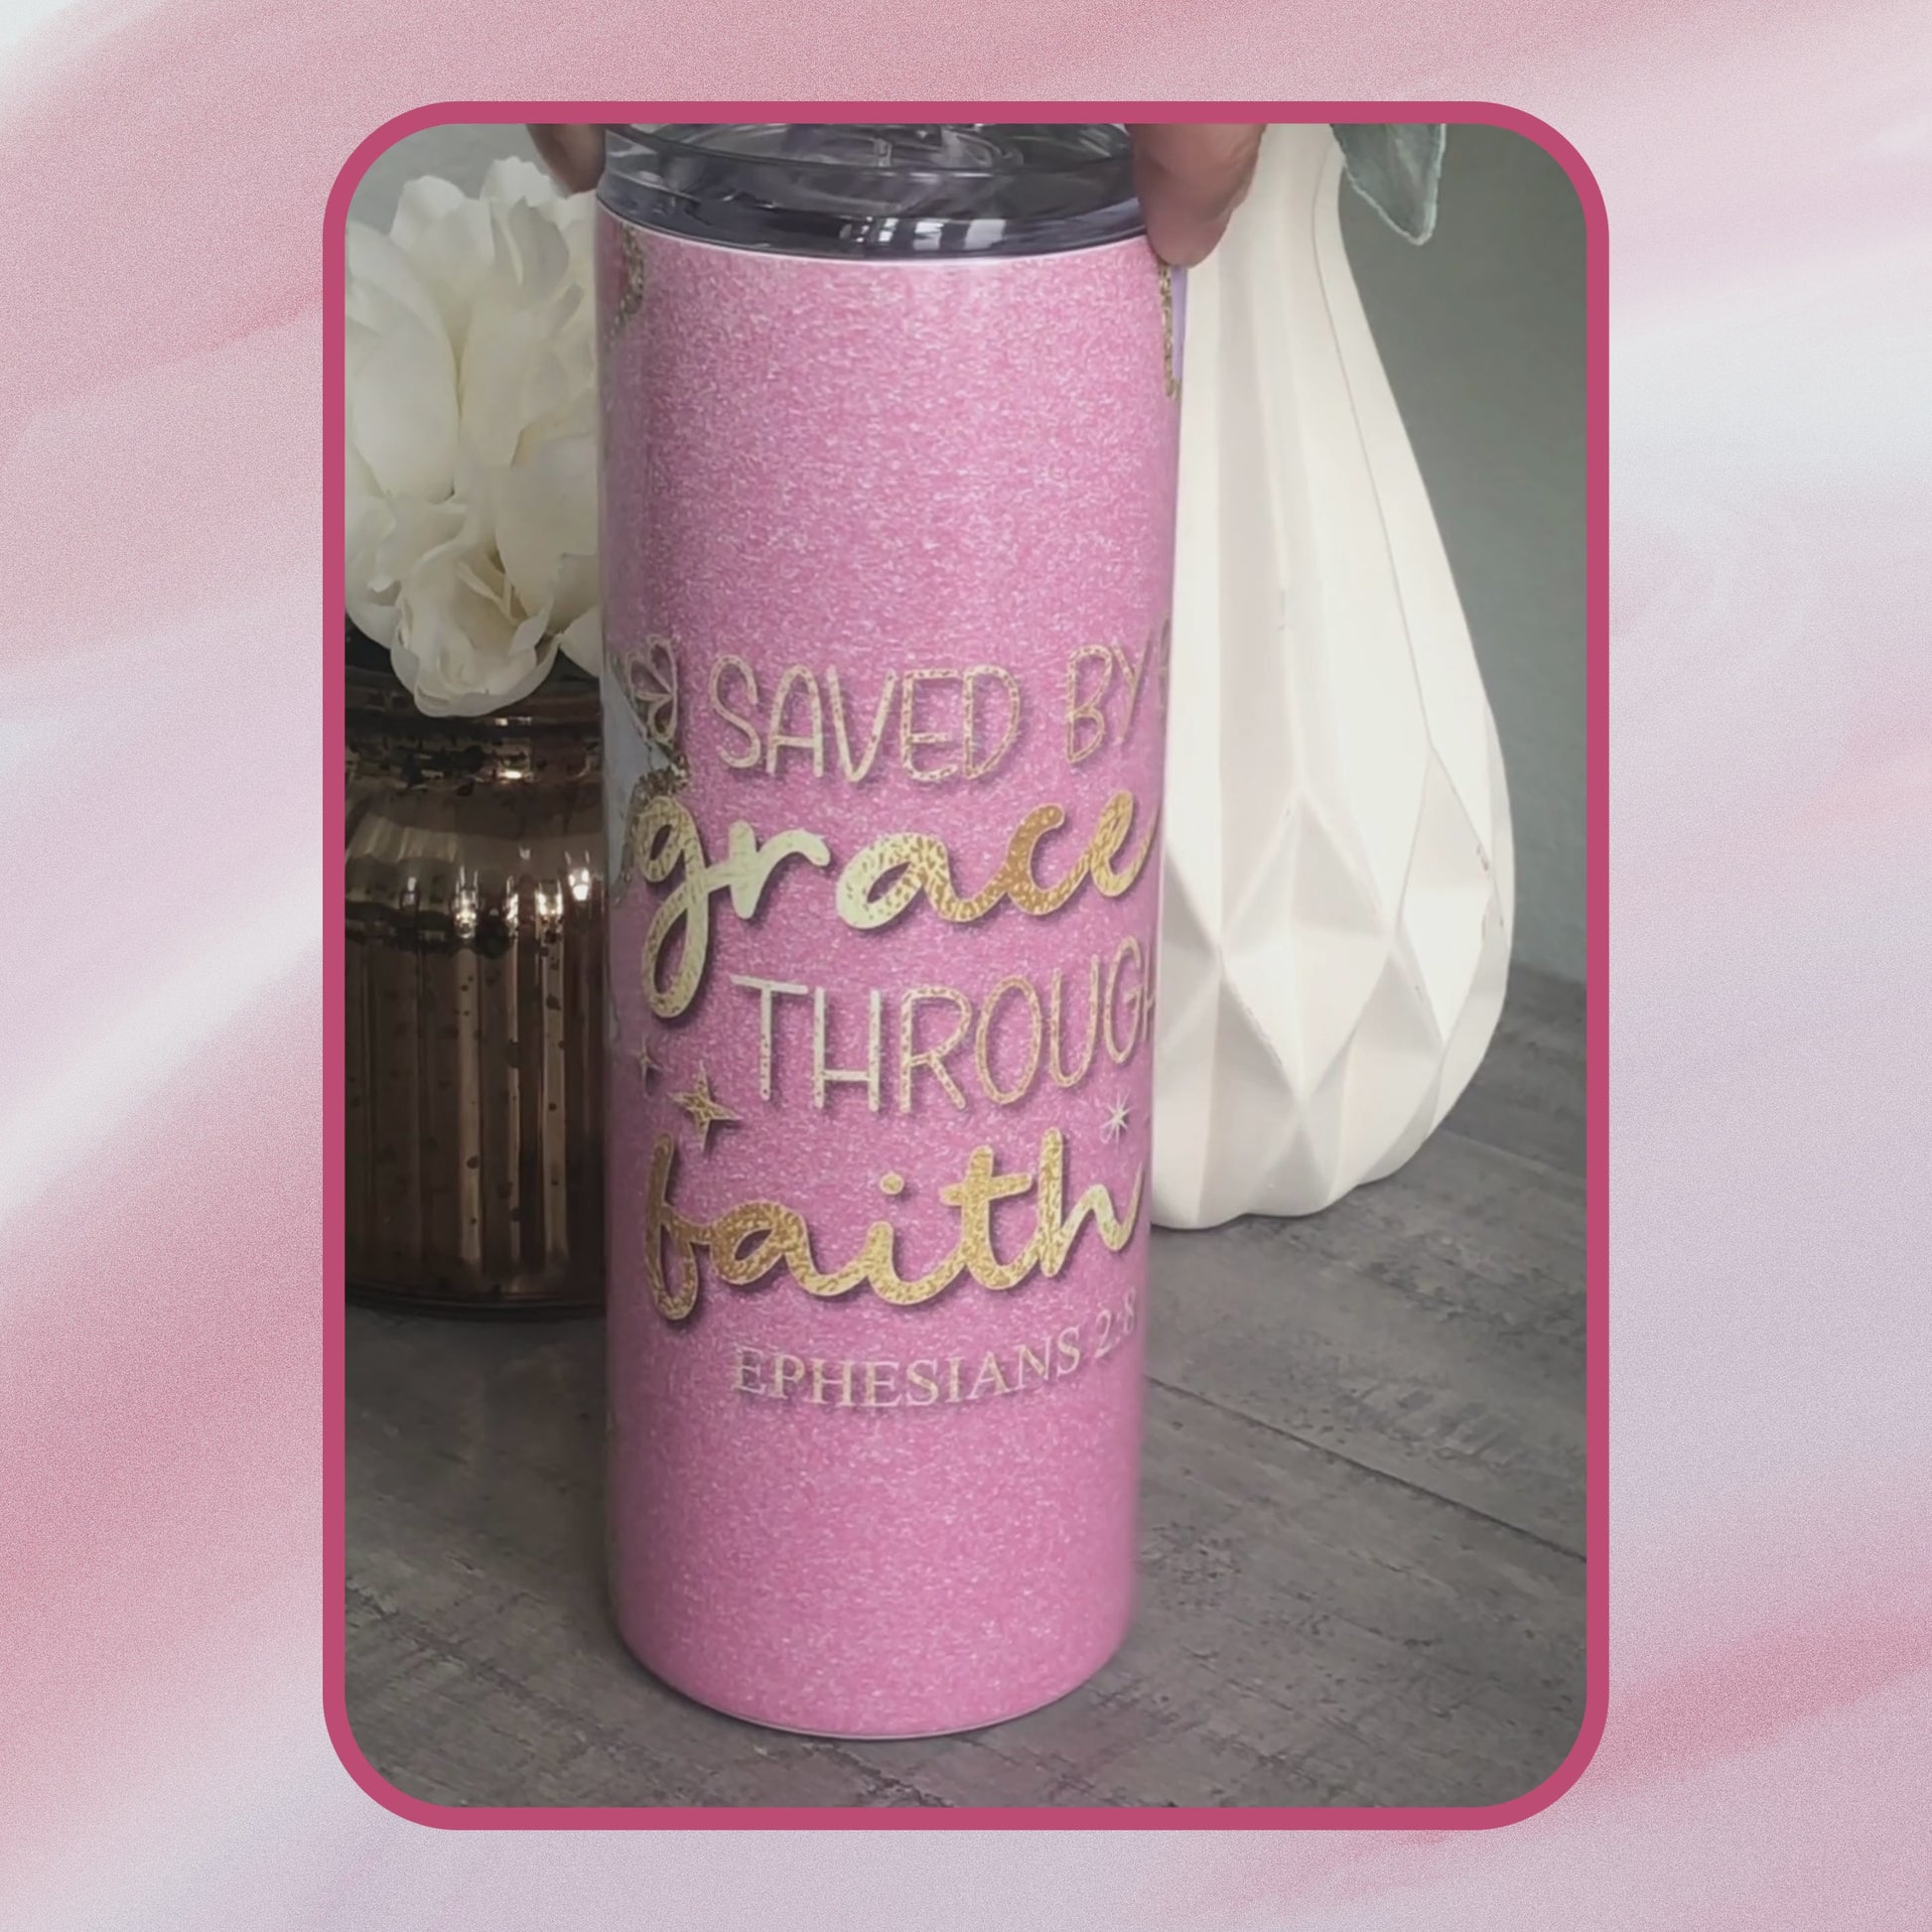 Spiritually significant stainless steel tumbler for carrying faith with you